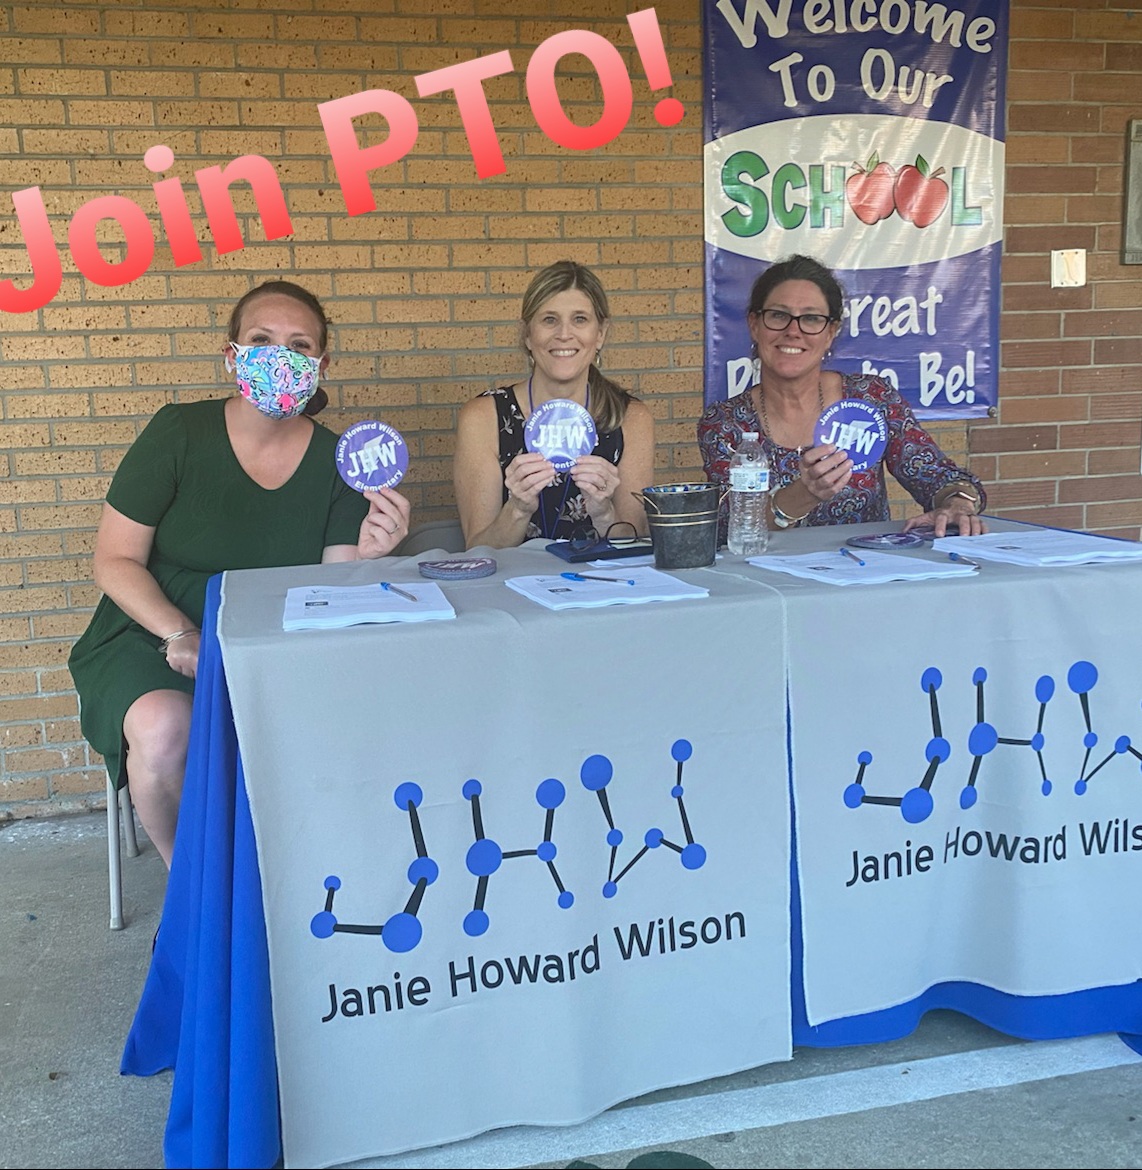 Join PTO